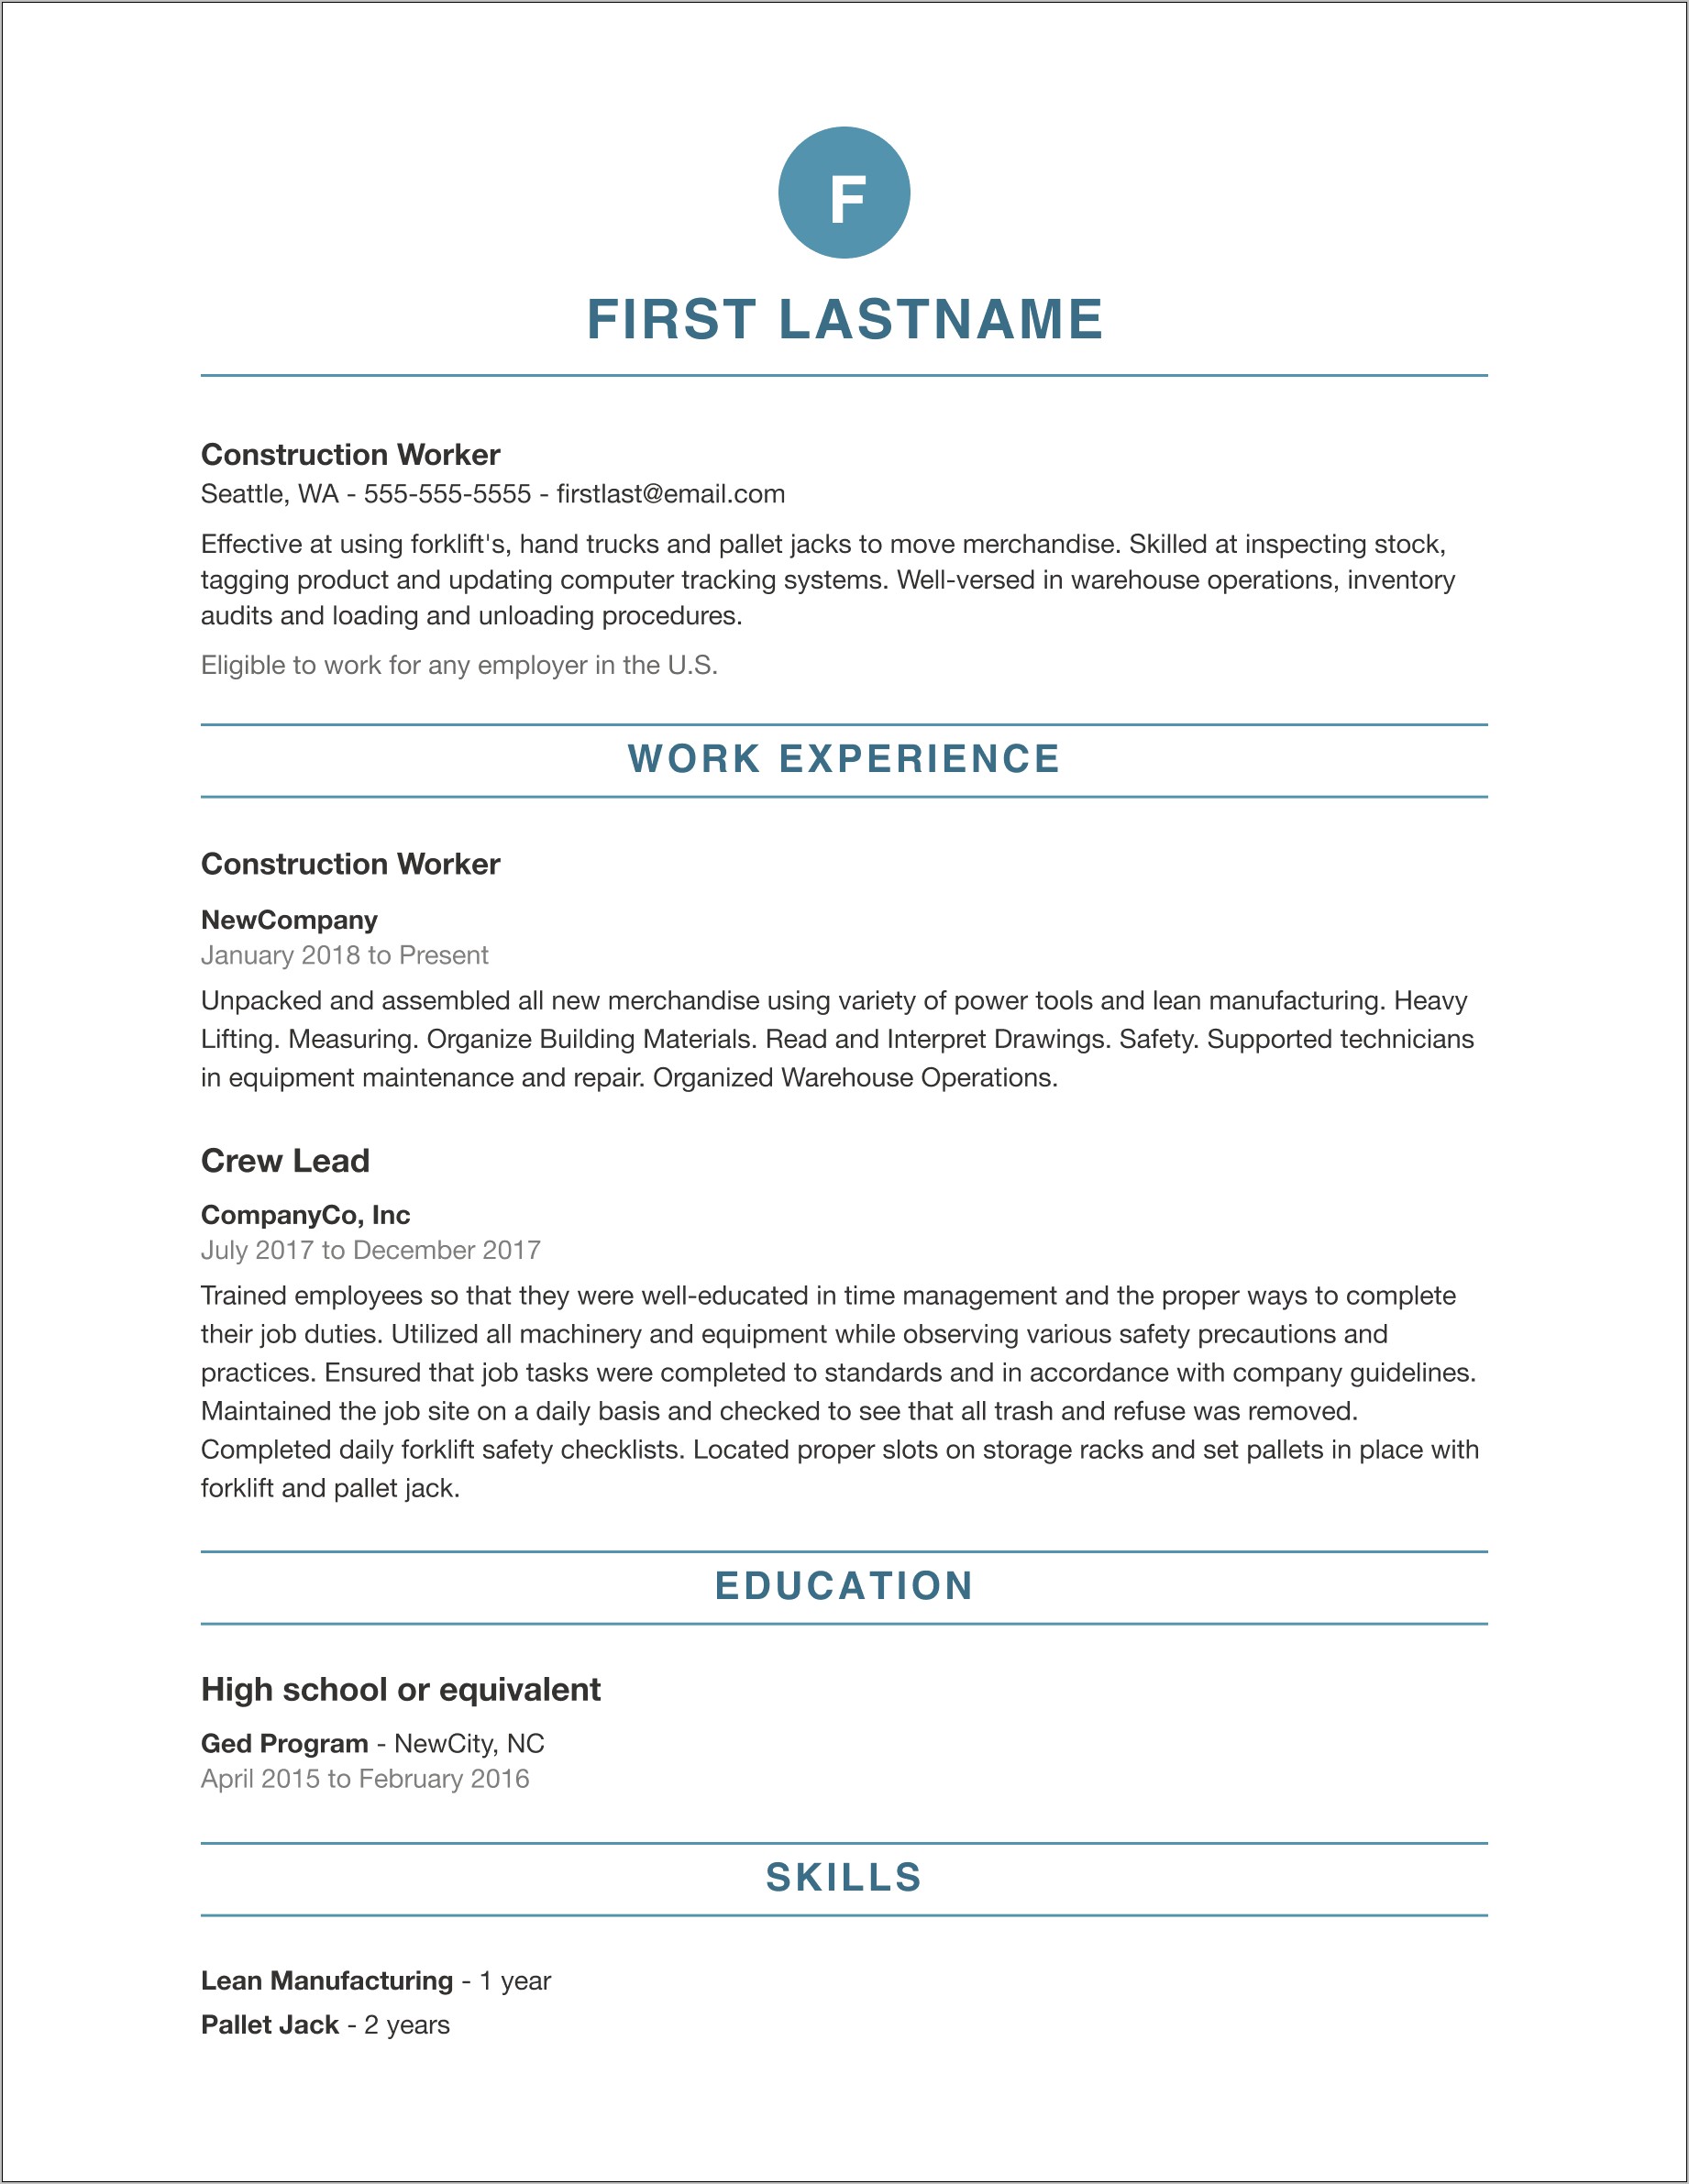 Best Format To Upload Your Resume